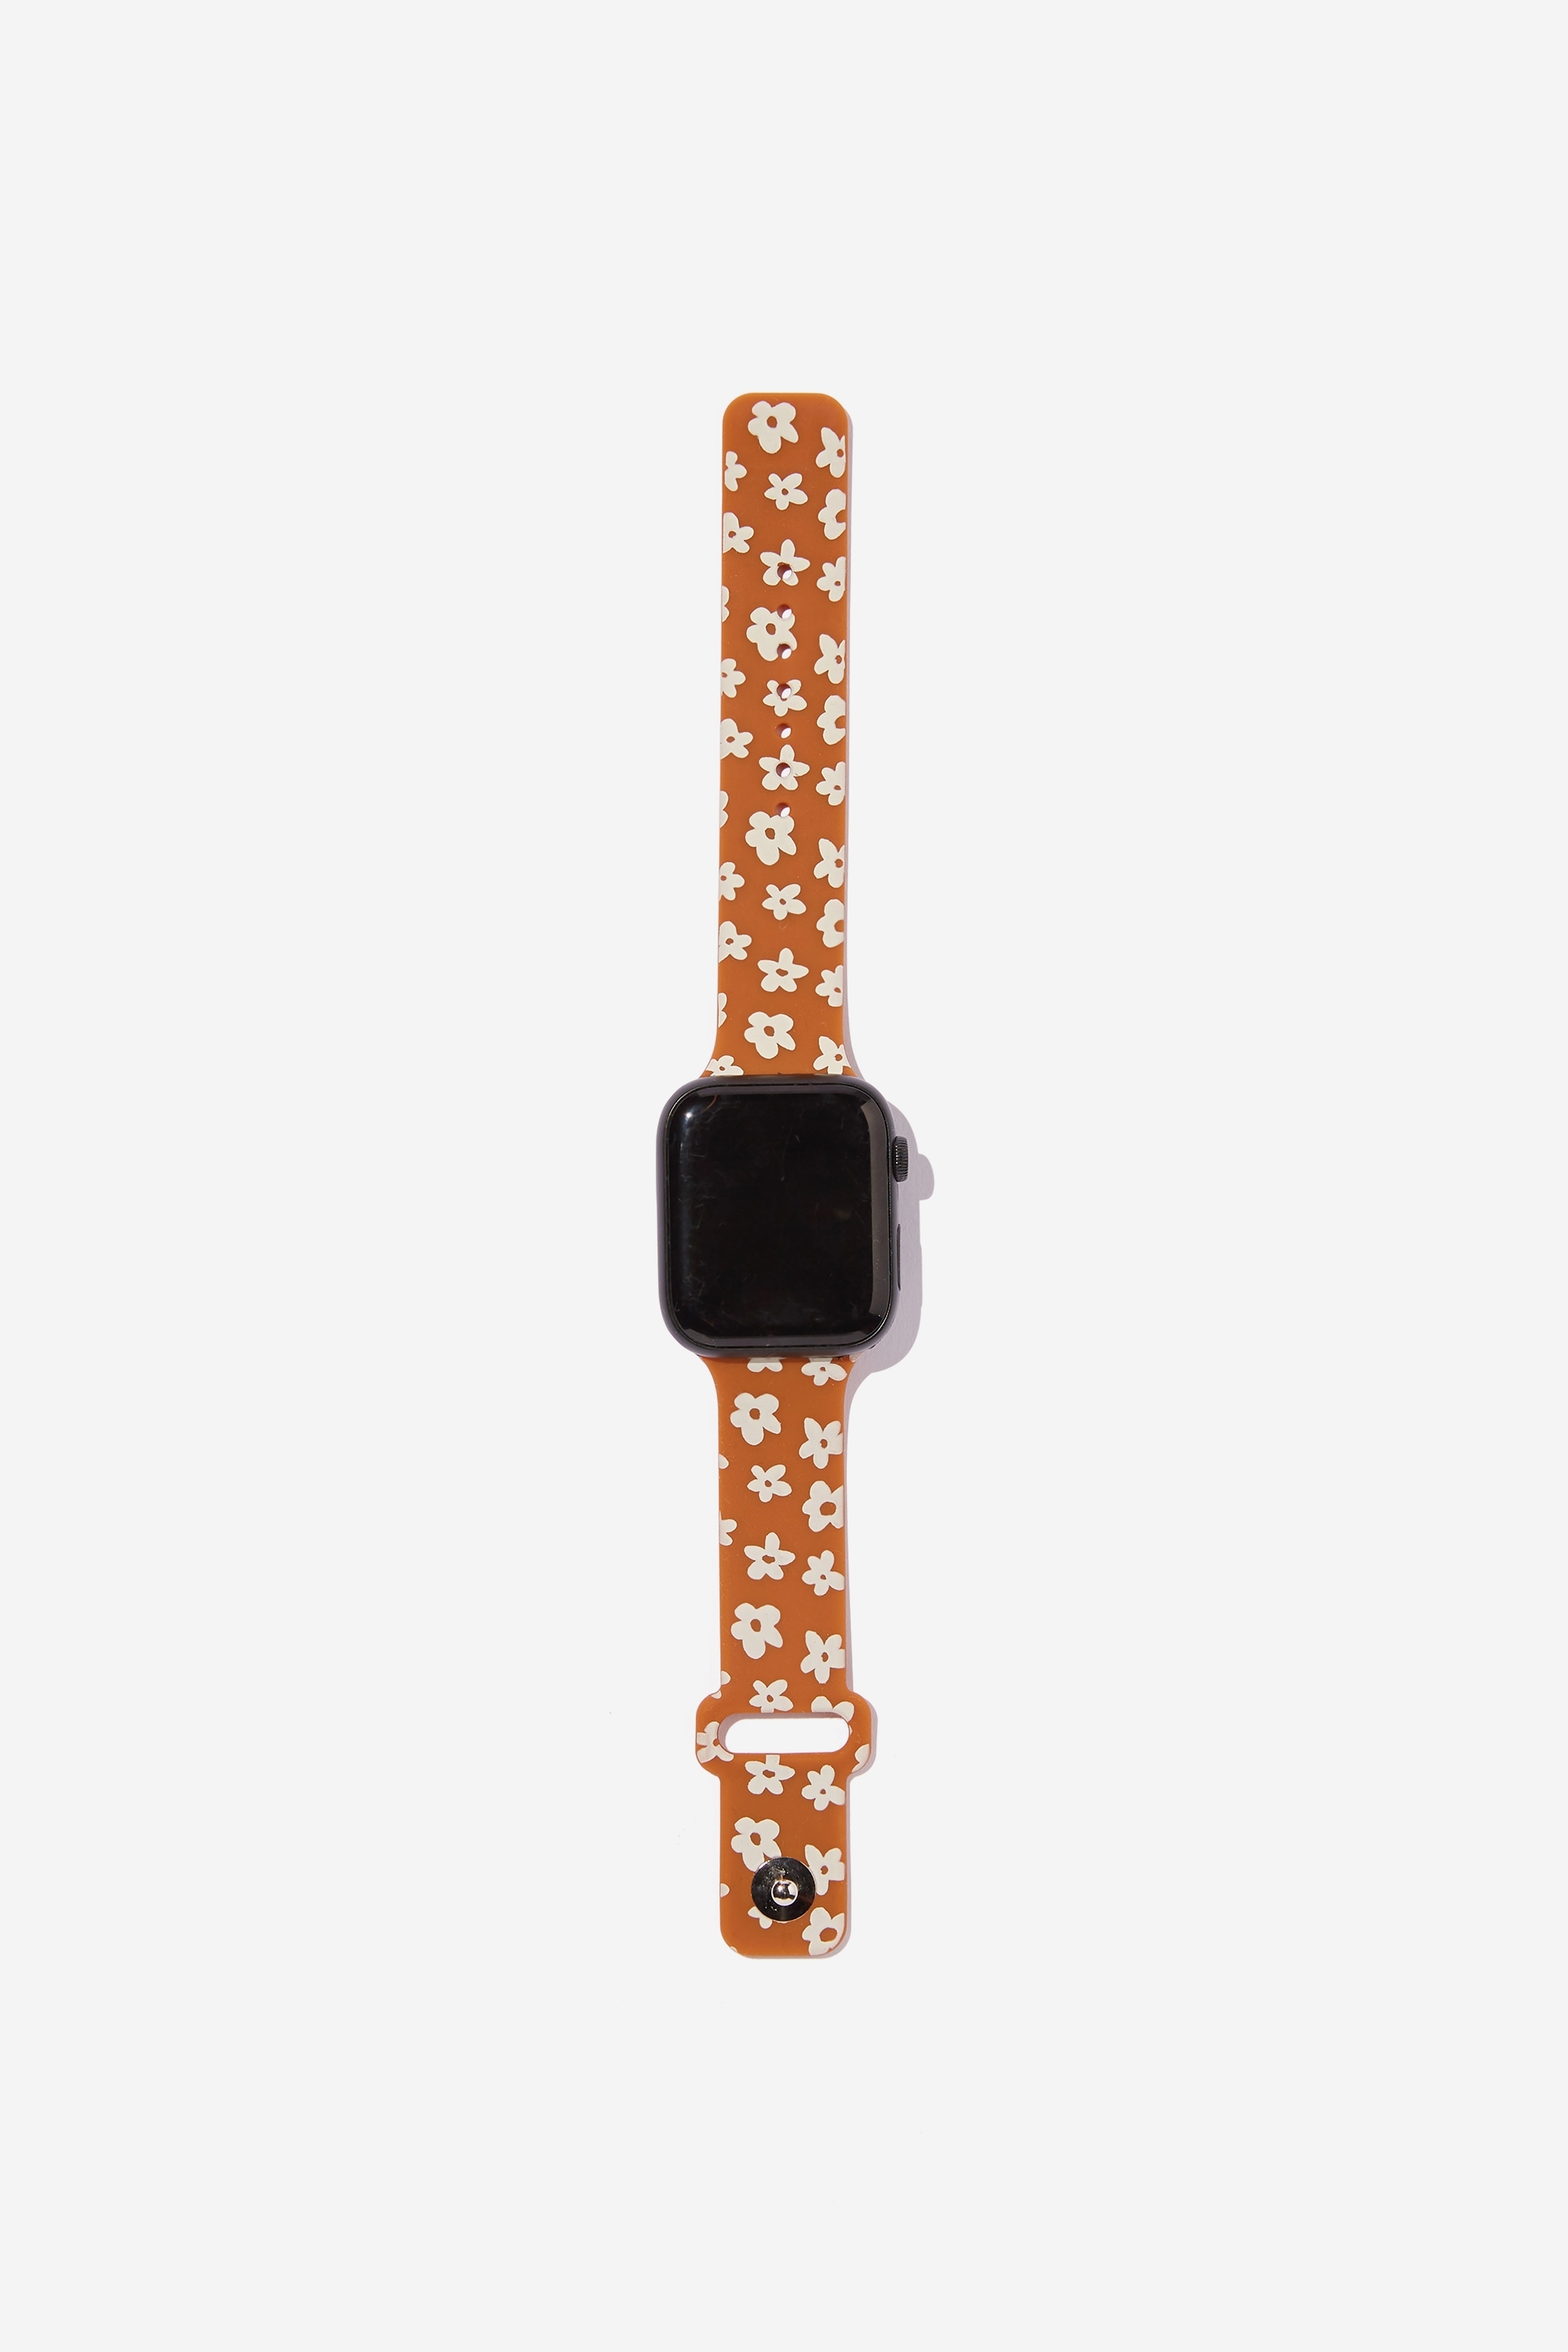 Typo - Strapped Watch Strap - Mid daisies butterscotch